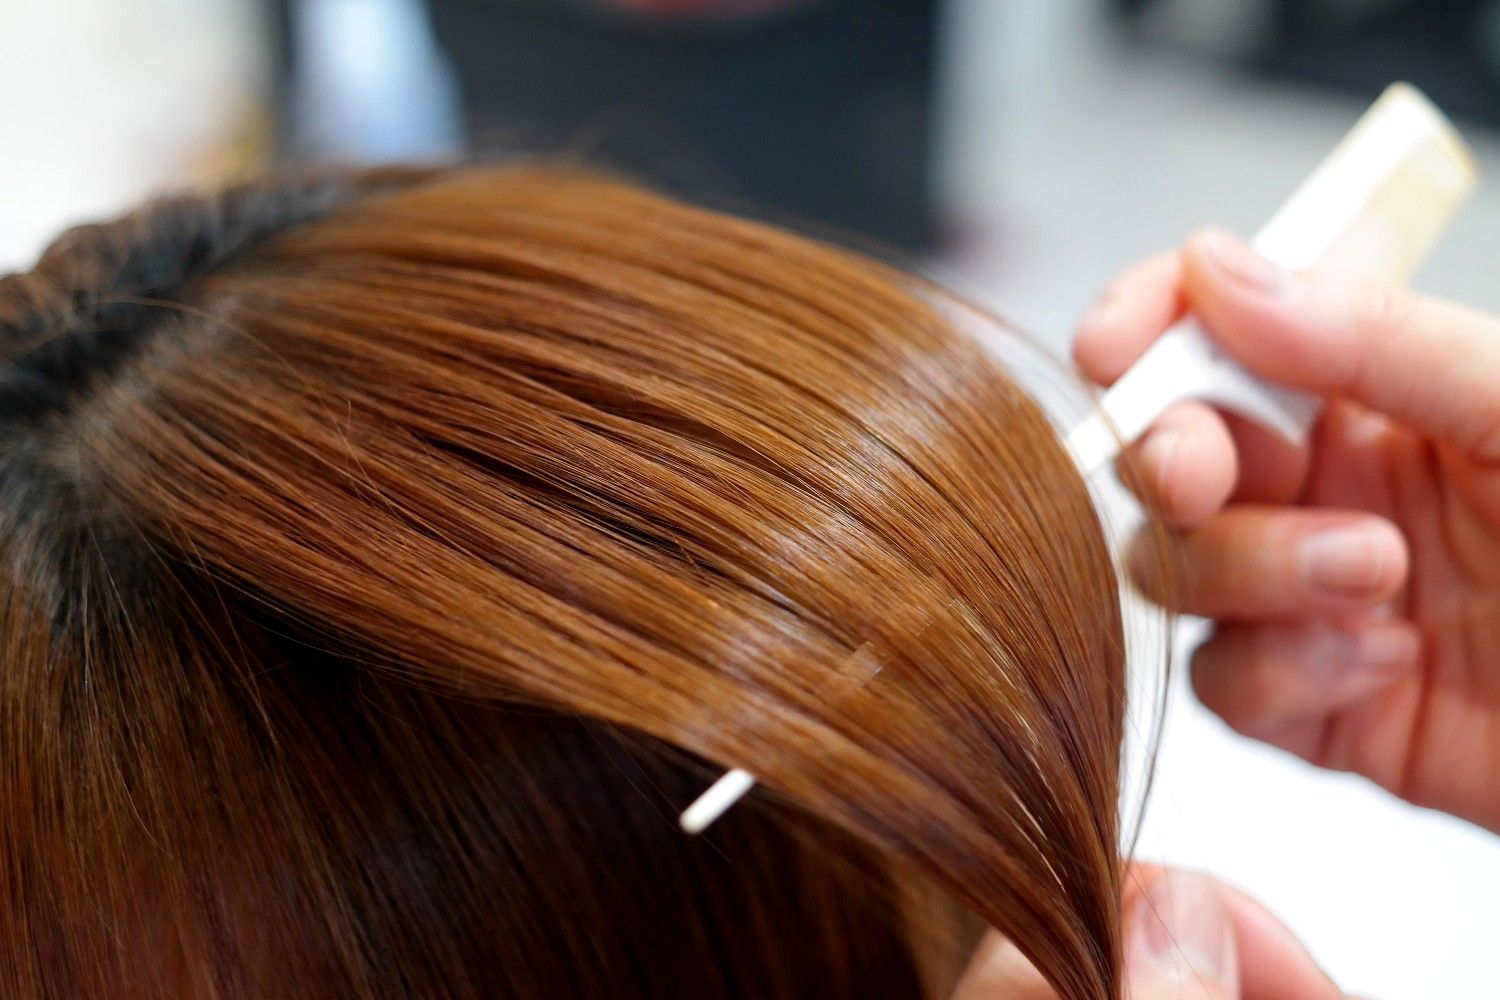 Hair smoothing treatment